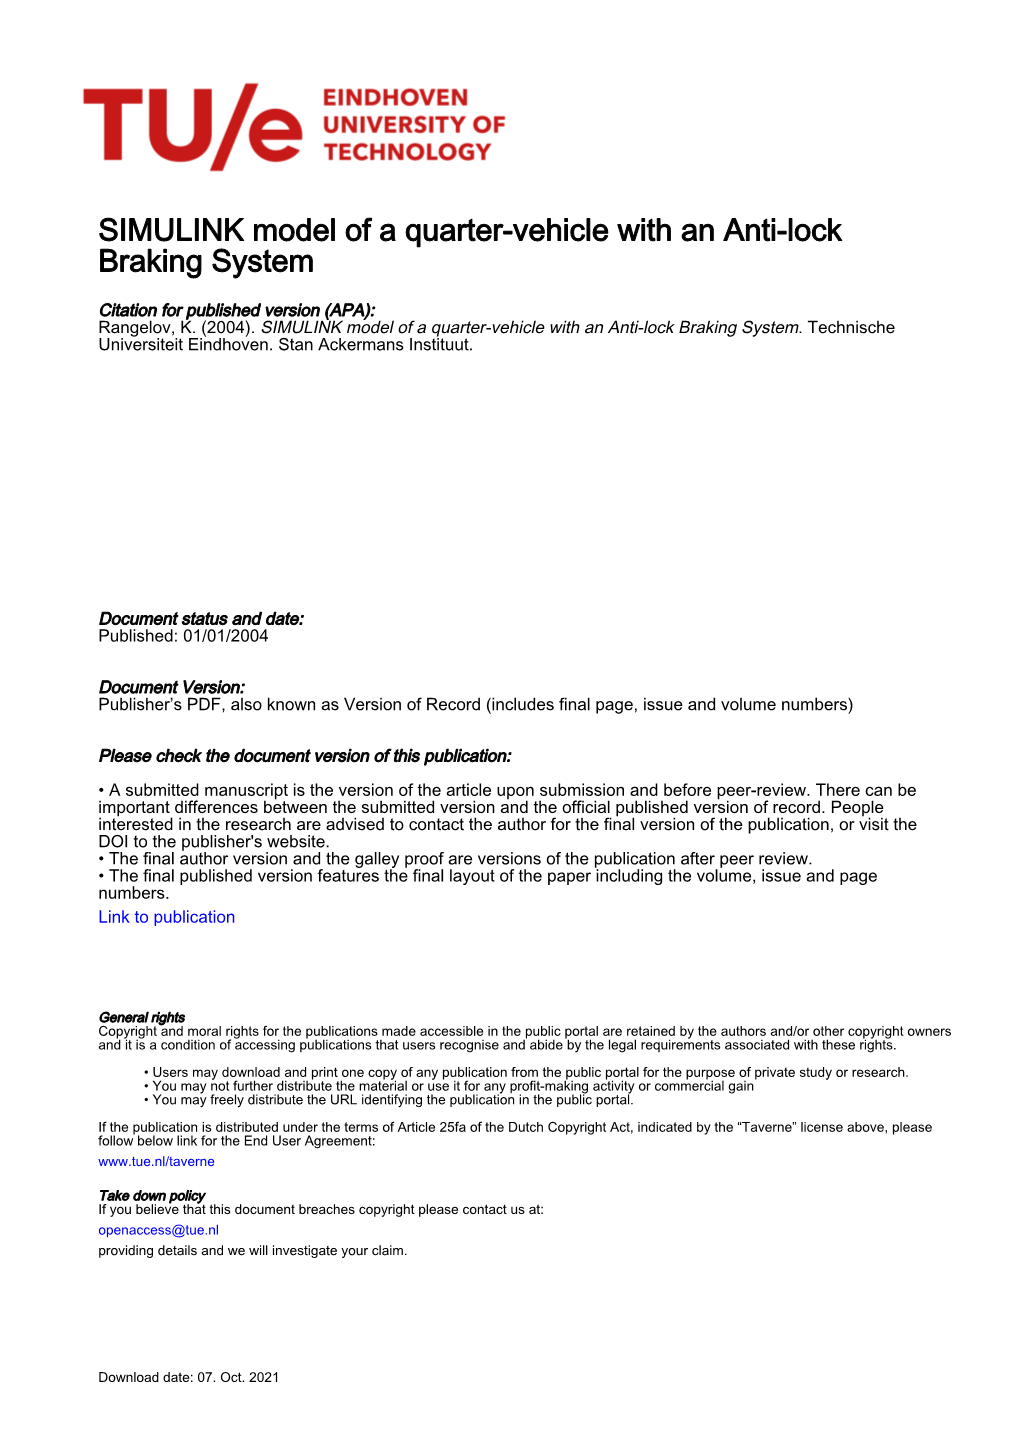 SIMULINK Model of a Quarter-Vehicle with an Anti-Lock Braking System